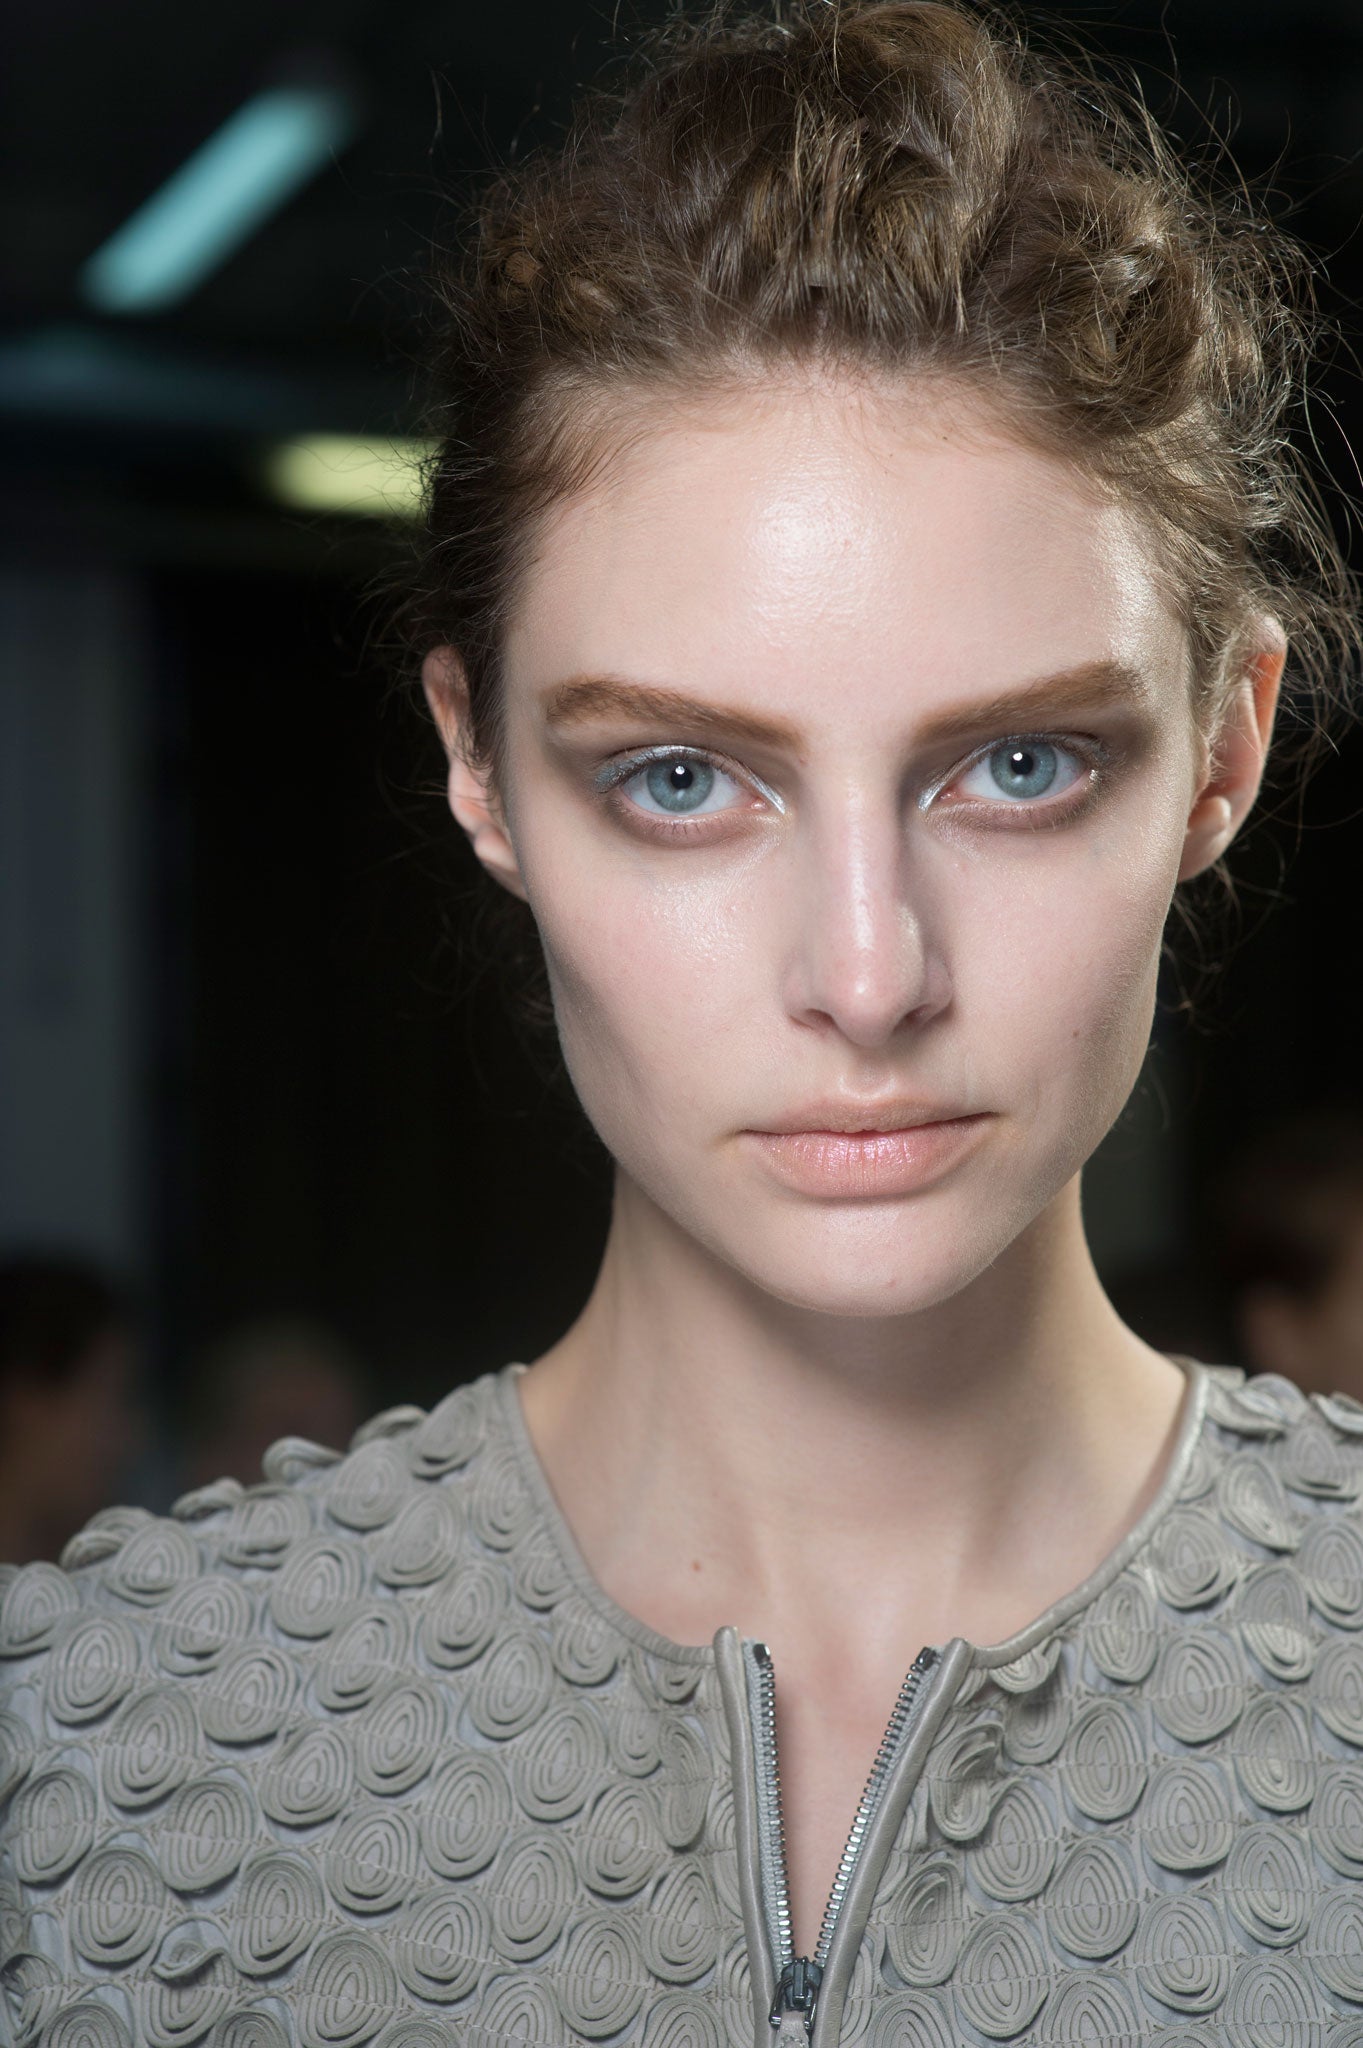 Armani's latest beauty innovation is make-up based on the catwalk collection